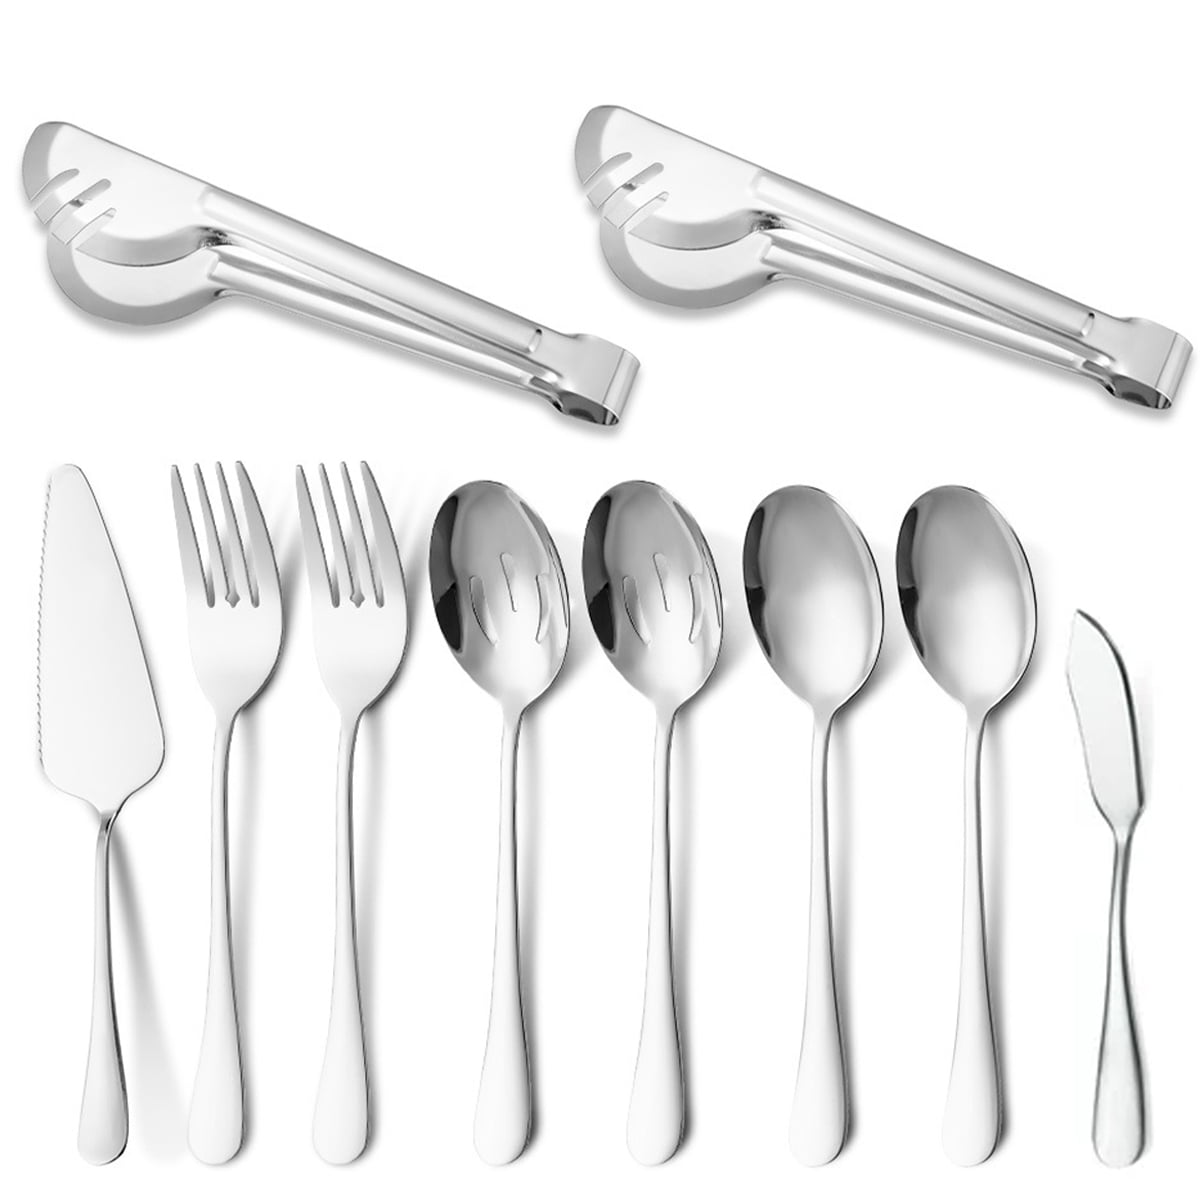 Darware Complete Serving Spoon & Utensil Set (6-piece SET); Includes Pasta Server Fork Spoon Slotted Spoon Ladle Cake/casserole Server; Stainless